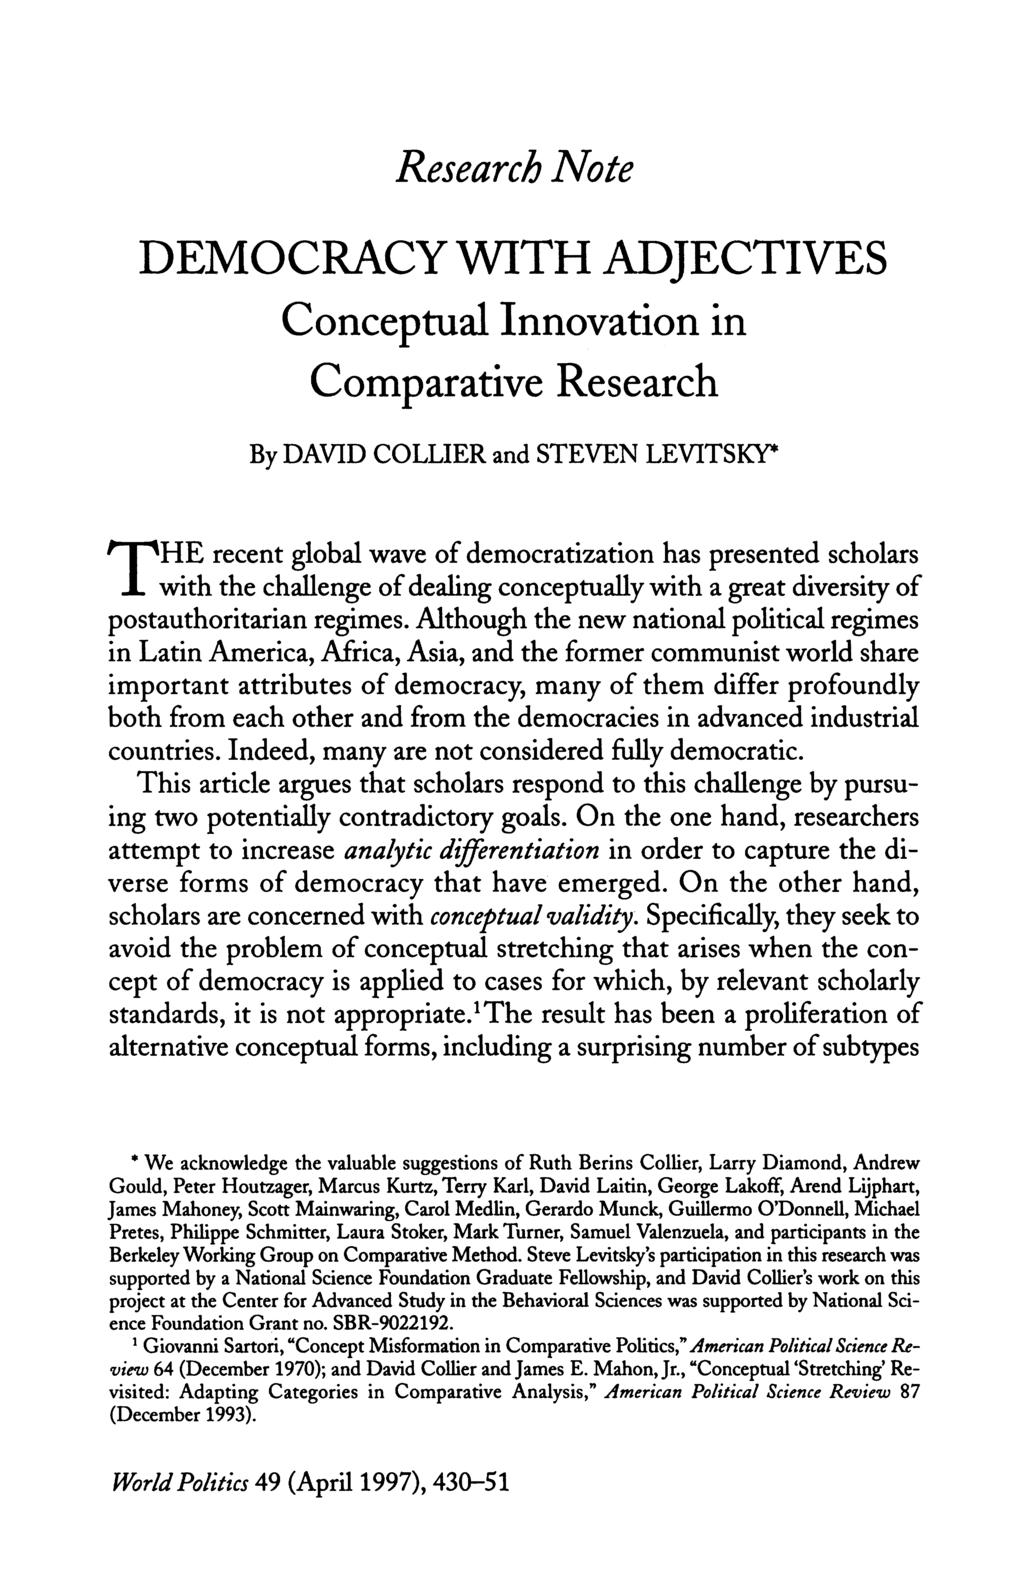 Research Note DEMOCRACY WITH ADJECTIVES Conceptual Innovation in Comparative Research By DAVID COLLIER and STEVEN LEVITSKY* recent global wave democratization has presented scholars THE with